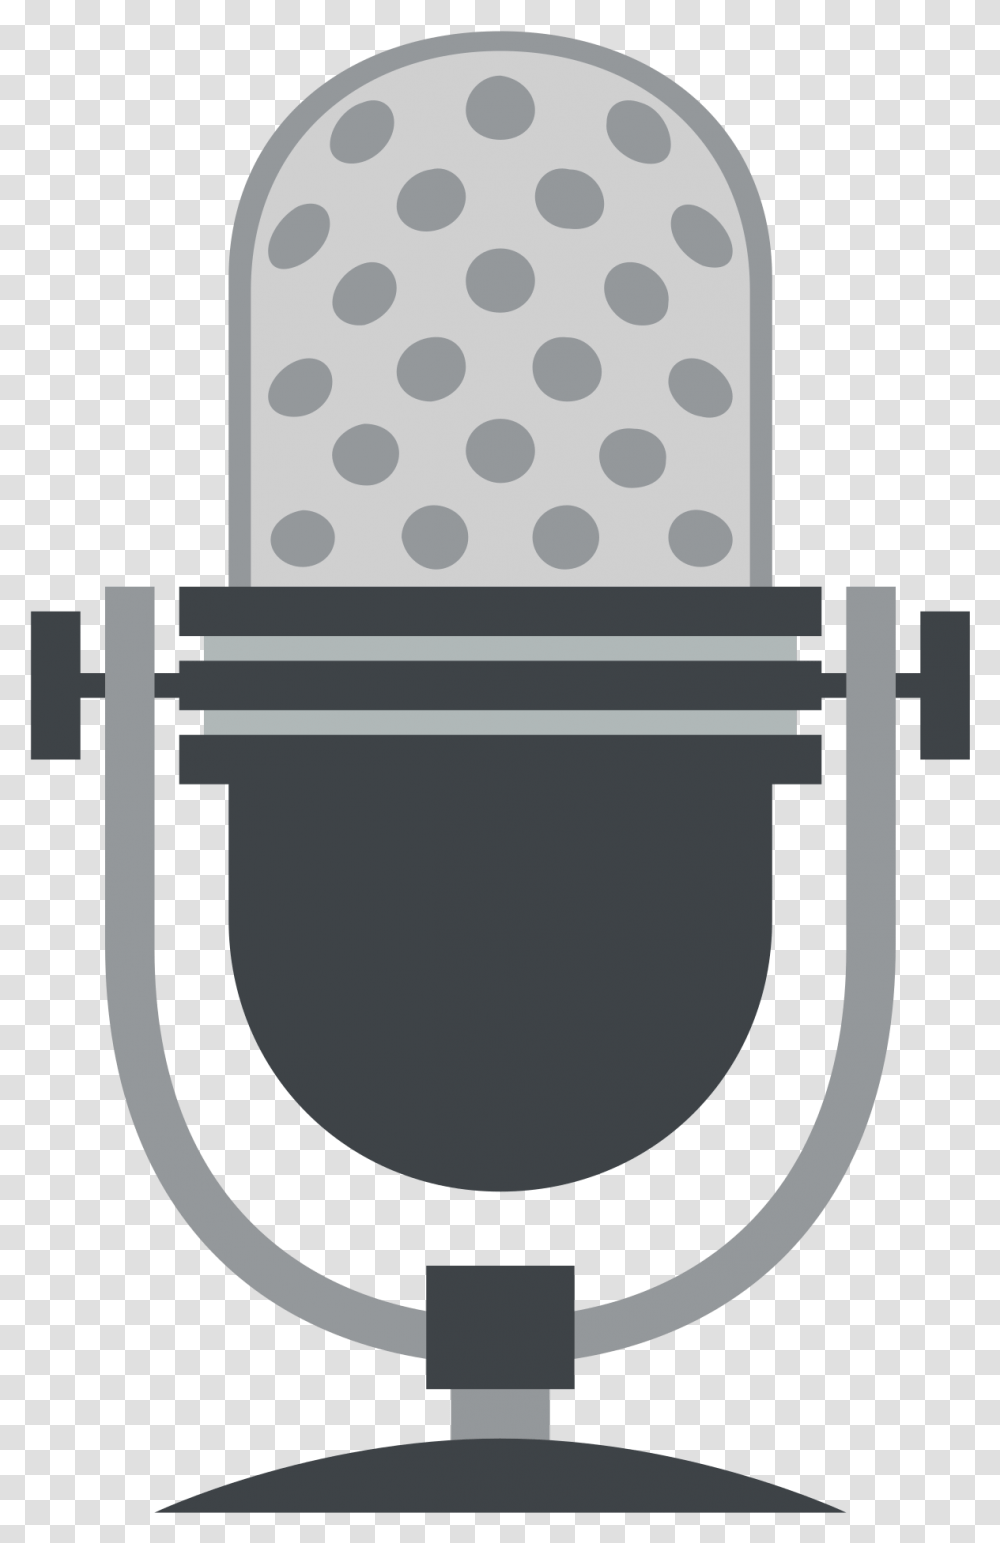 Microphone Clip Art Black And White Microphone Emoji, Armor, Rug Transparent Png